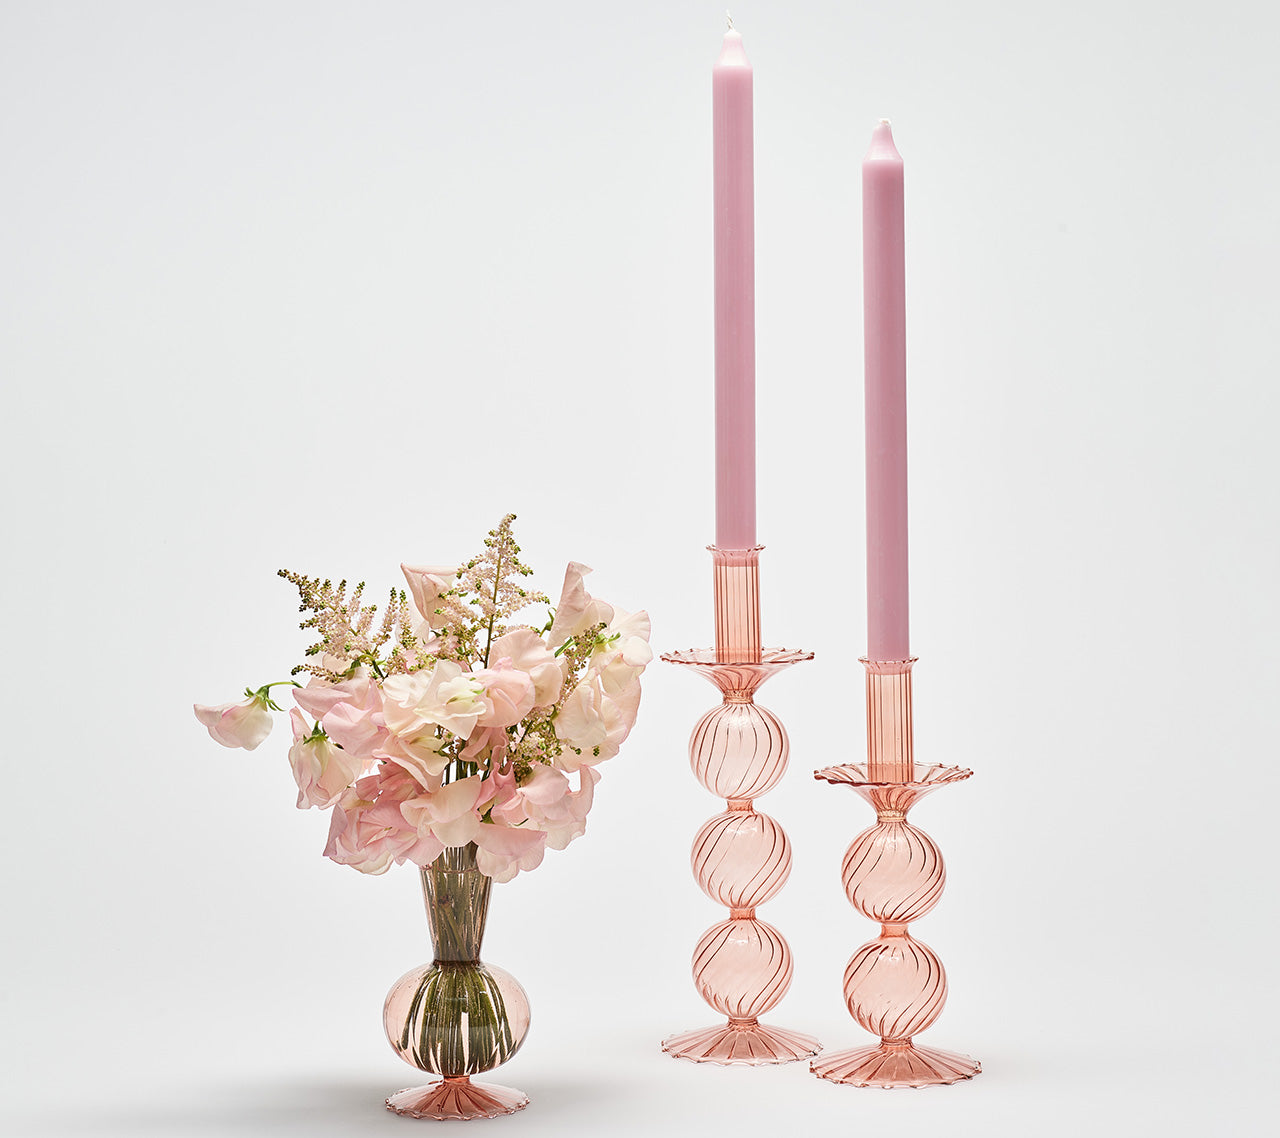 Two Bella Candle Holders in blush next to a Tess Bud Vase in blush with similar-color flowers